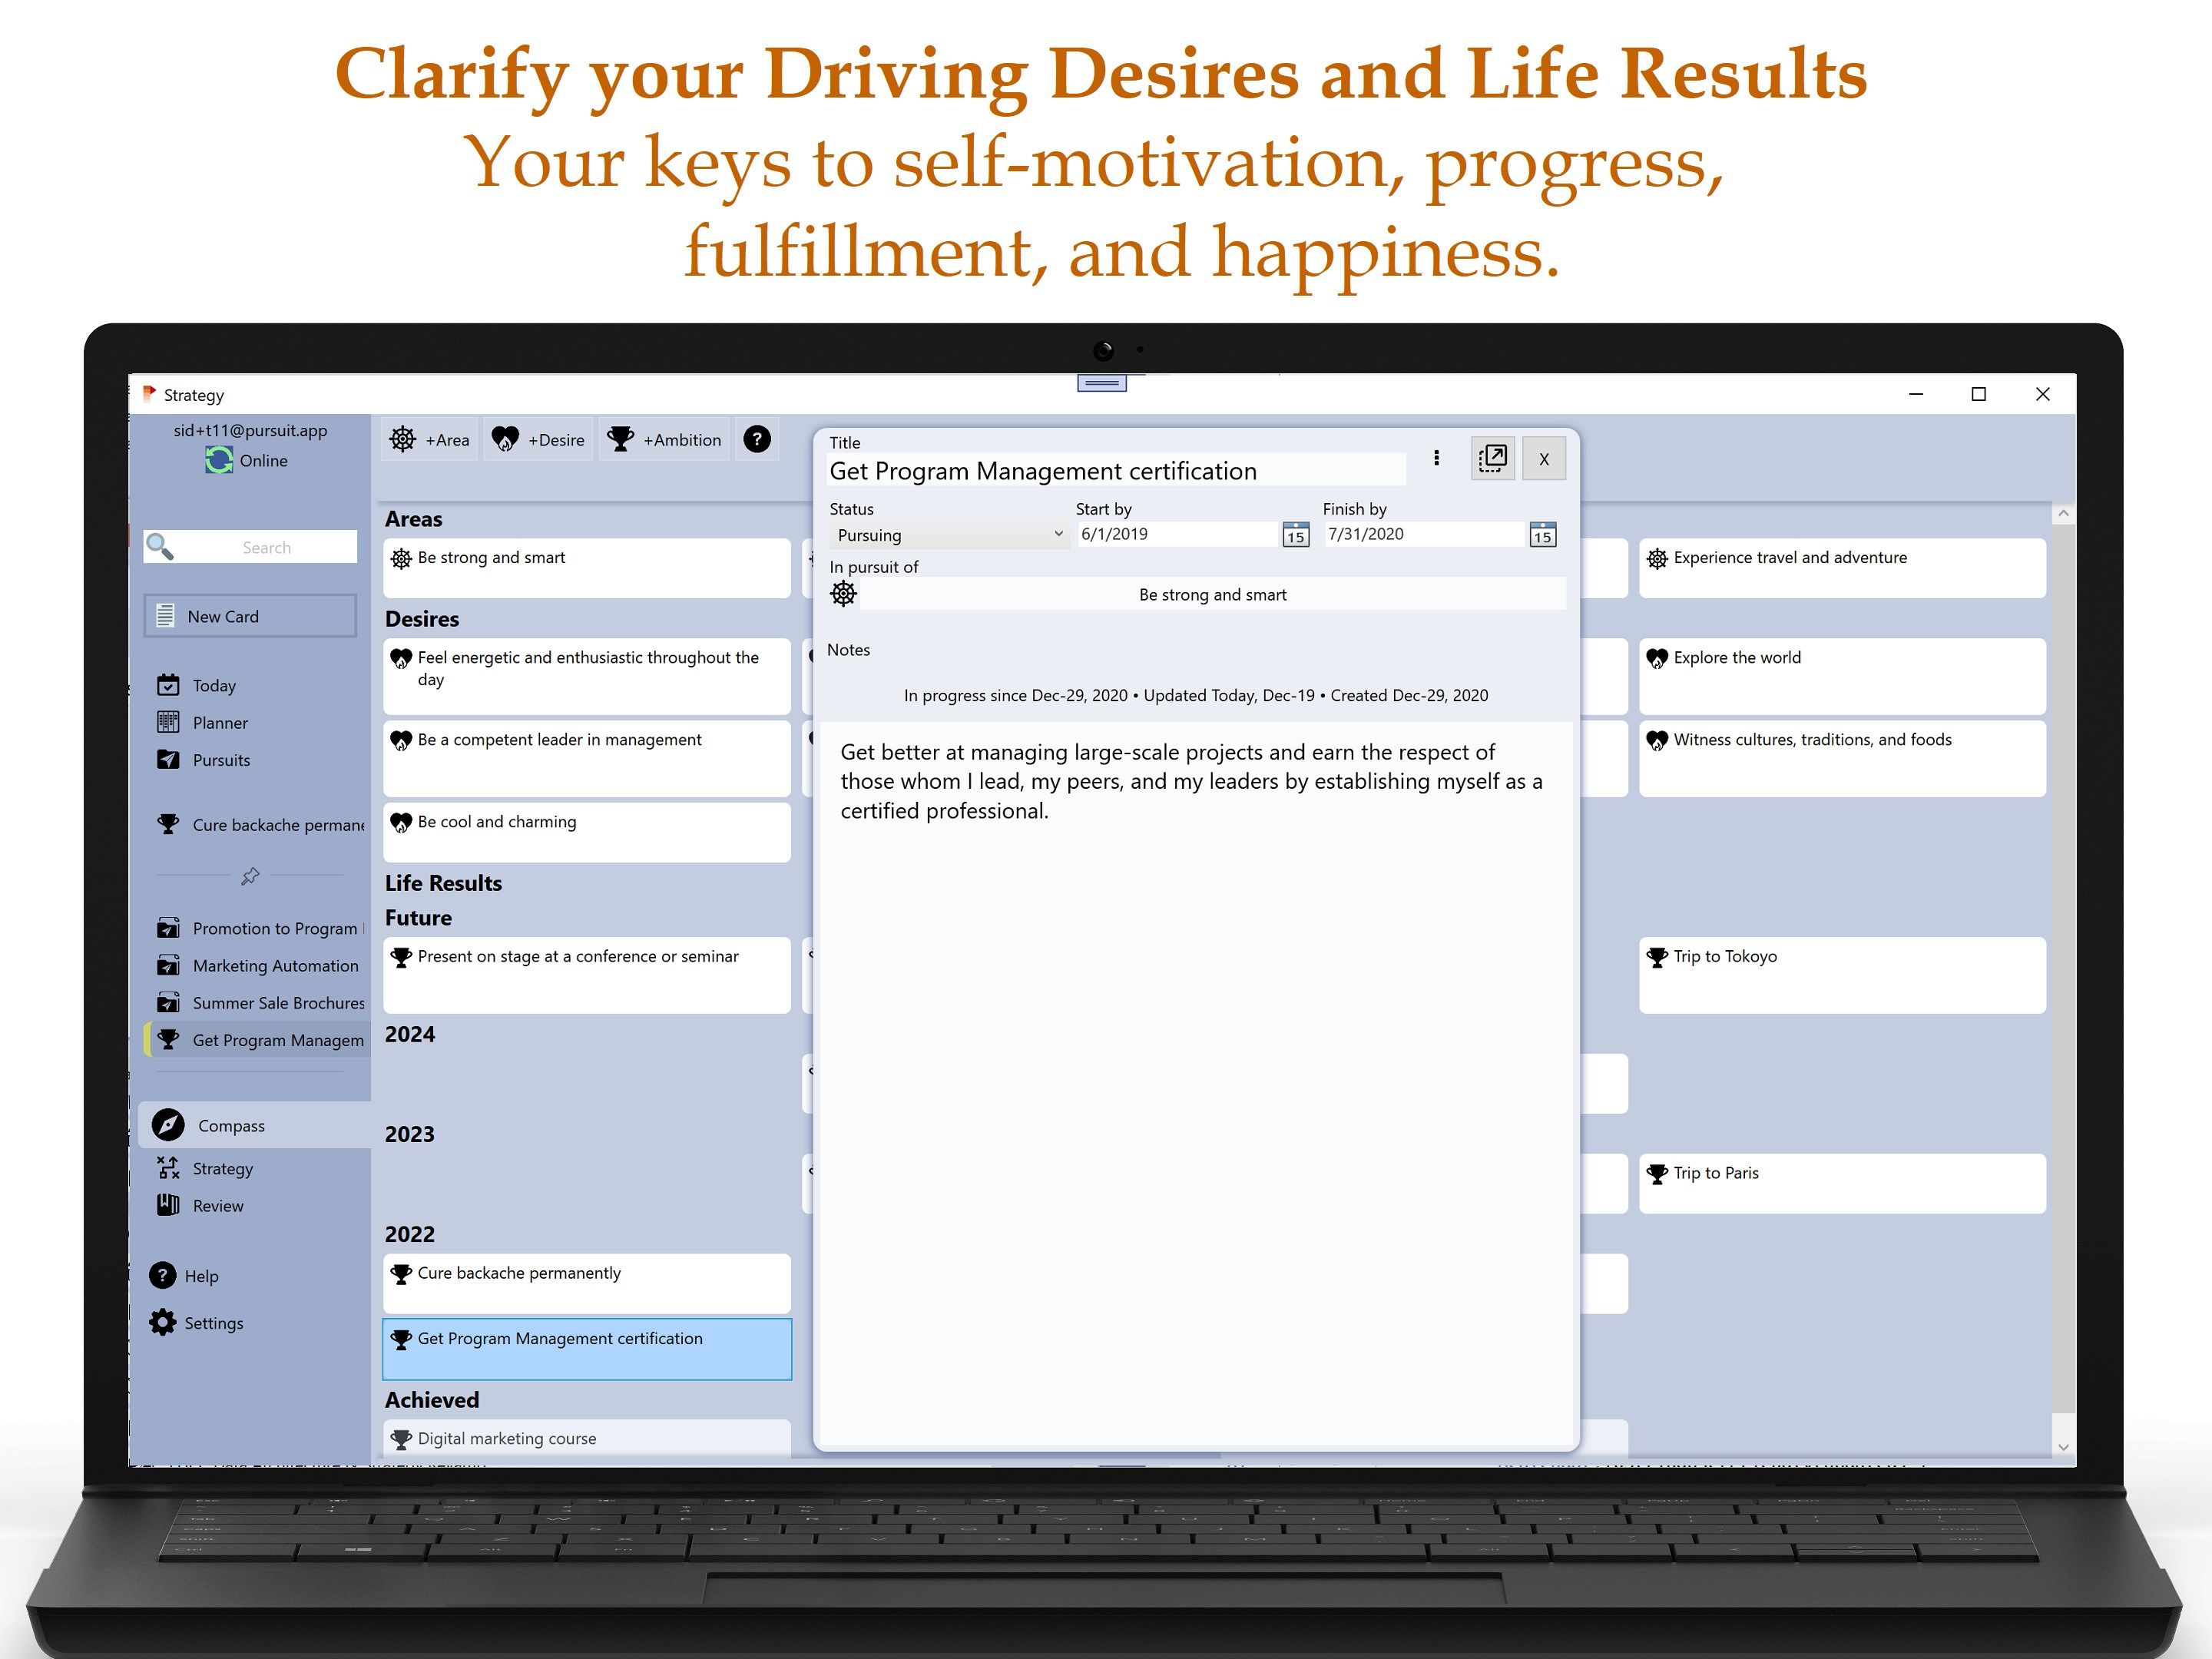 Clarify your Driving Desires and Life Results: Your keys to self-motivation, progress, fulfillment, and happiness.